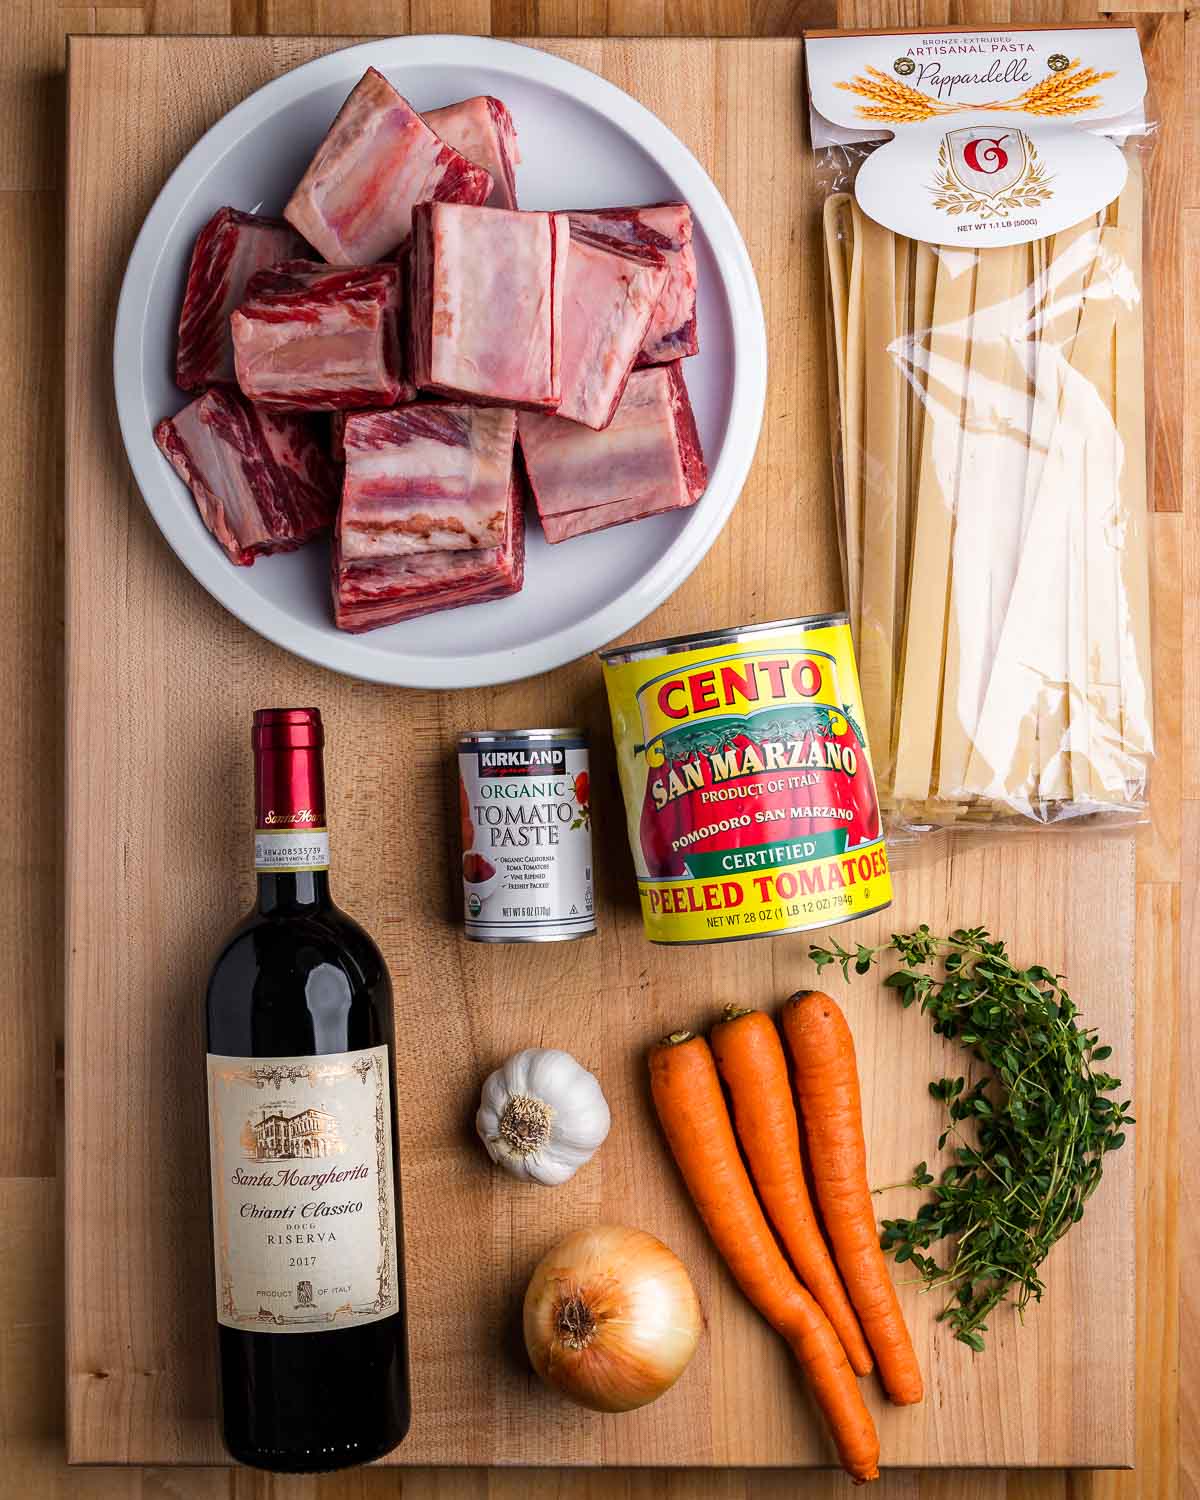 Ingredients shown: short ribs, pappardelle, canned tomatoes, red wine, garlic, onion, carrots, and thyme.